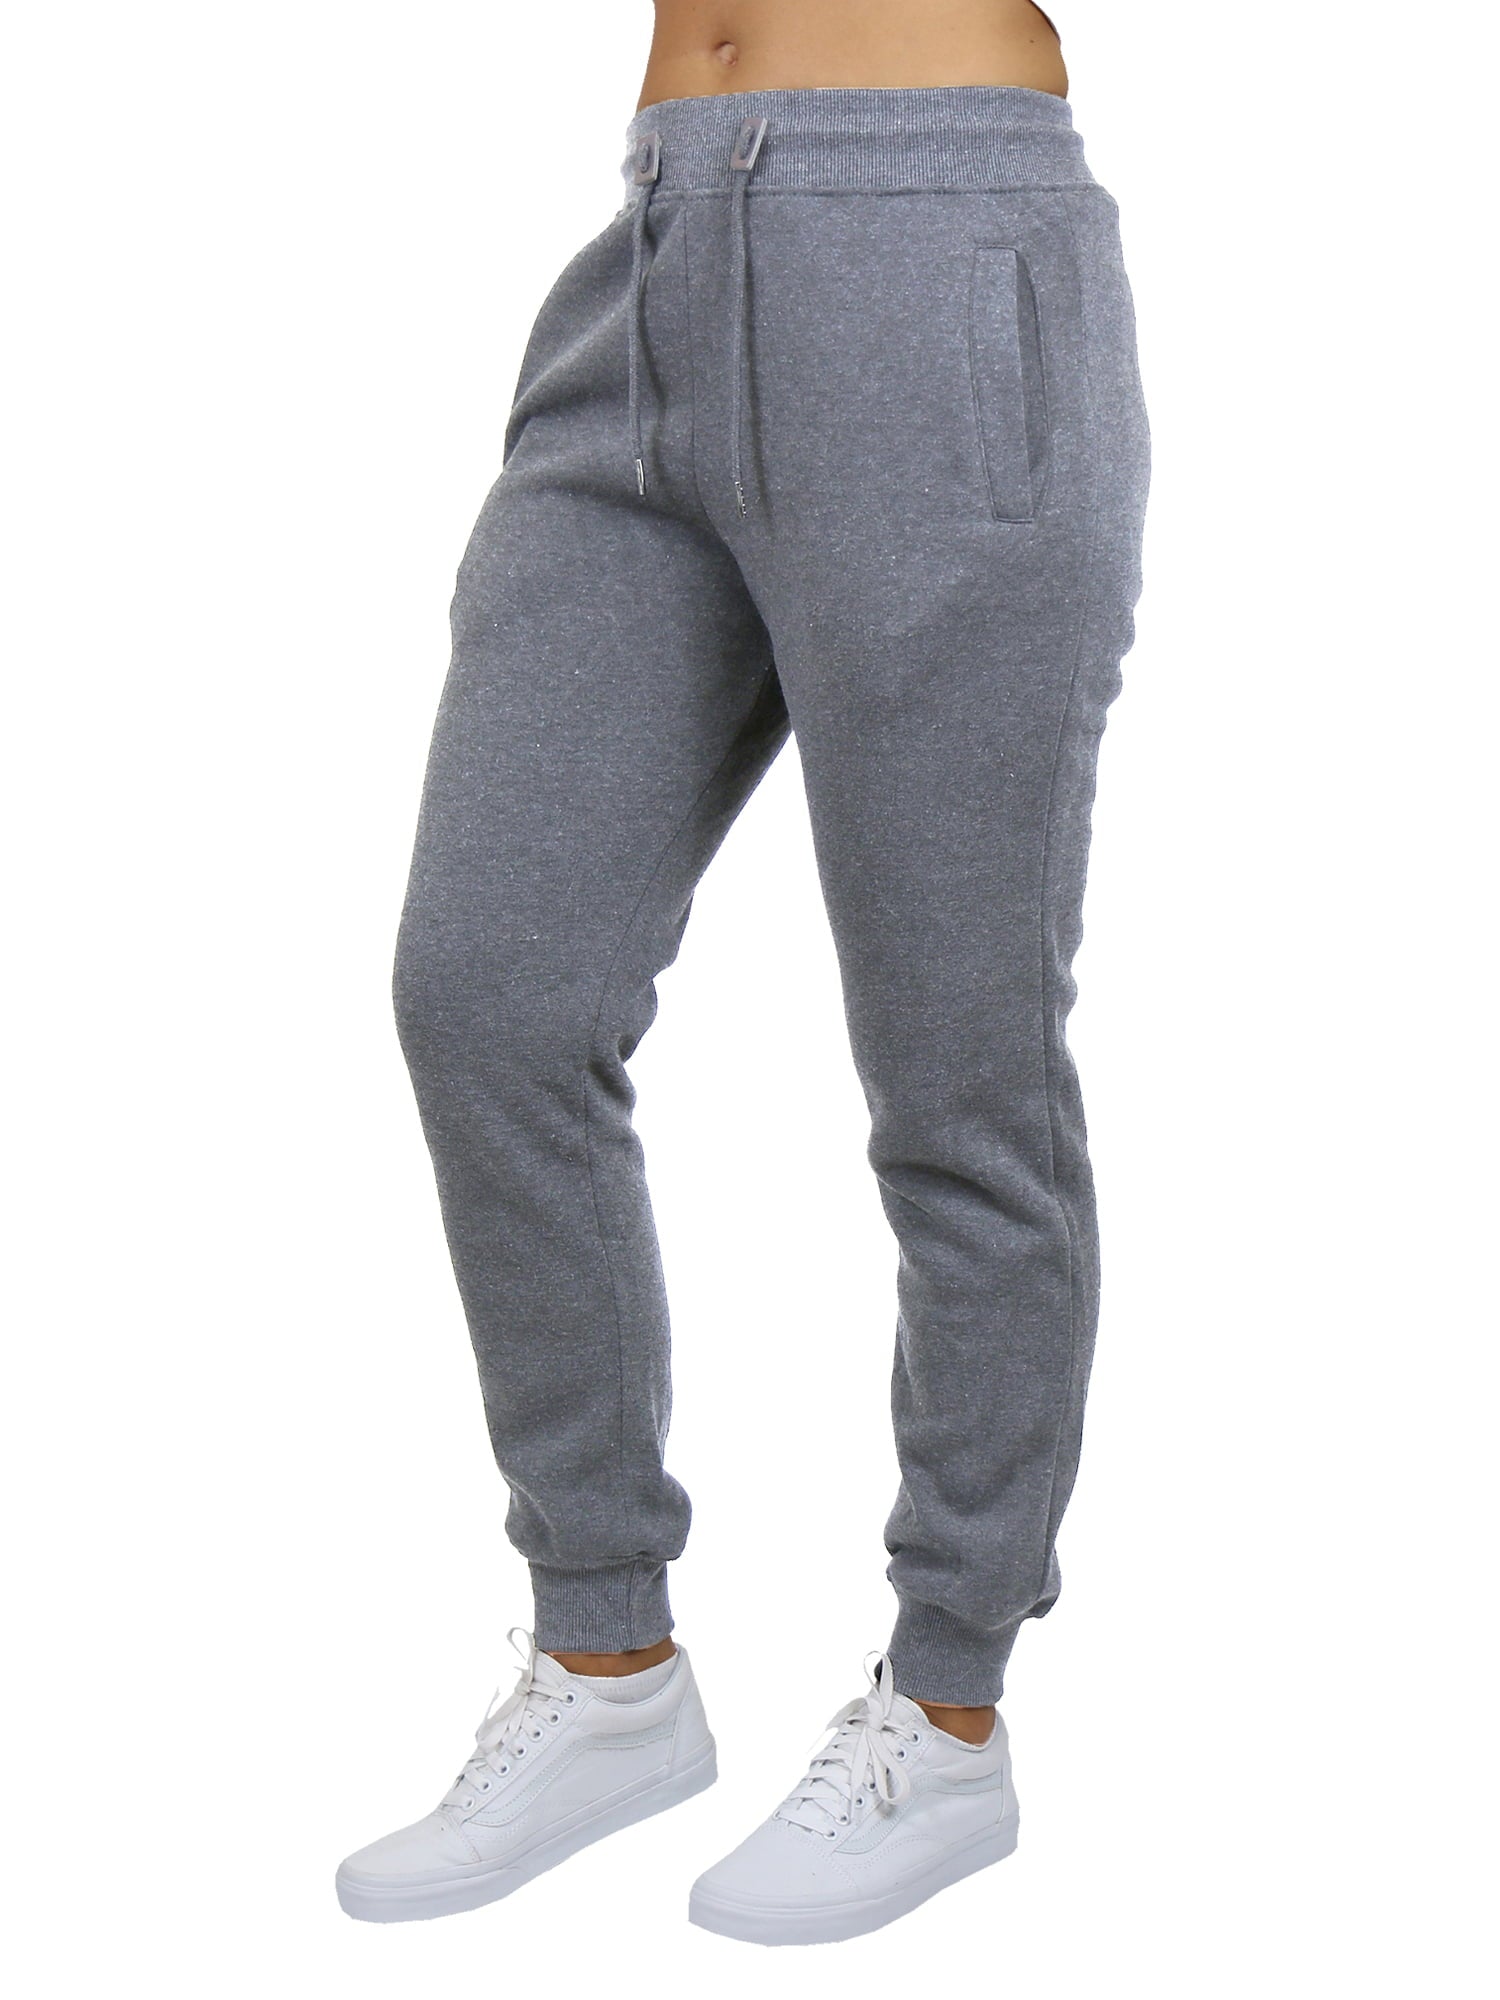 How Much Are Sweatpants At Walmart? – solowomen